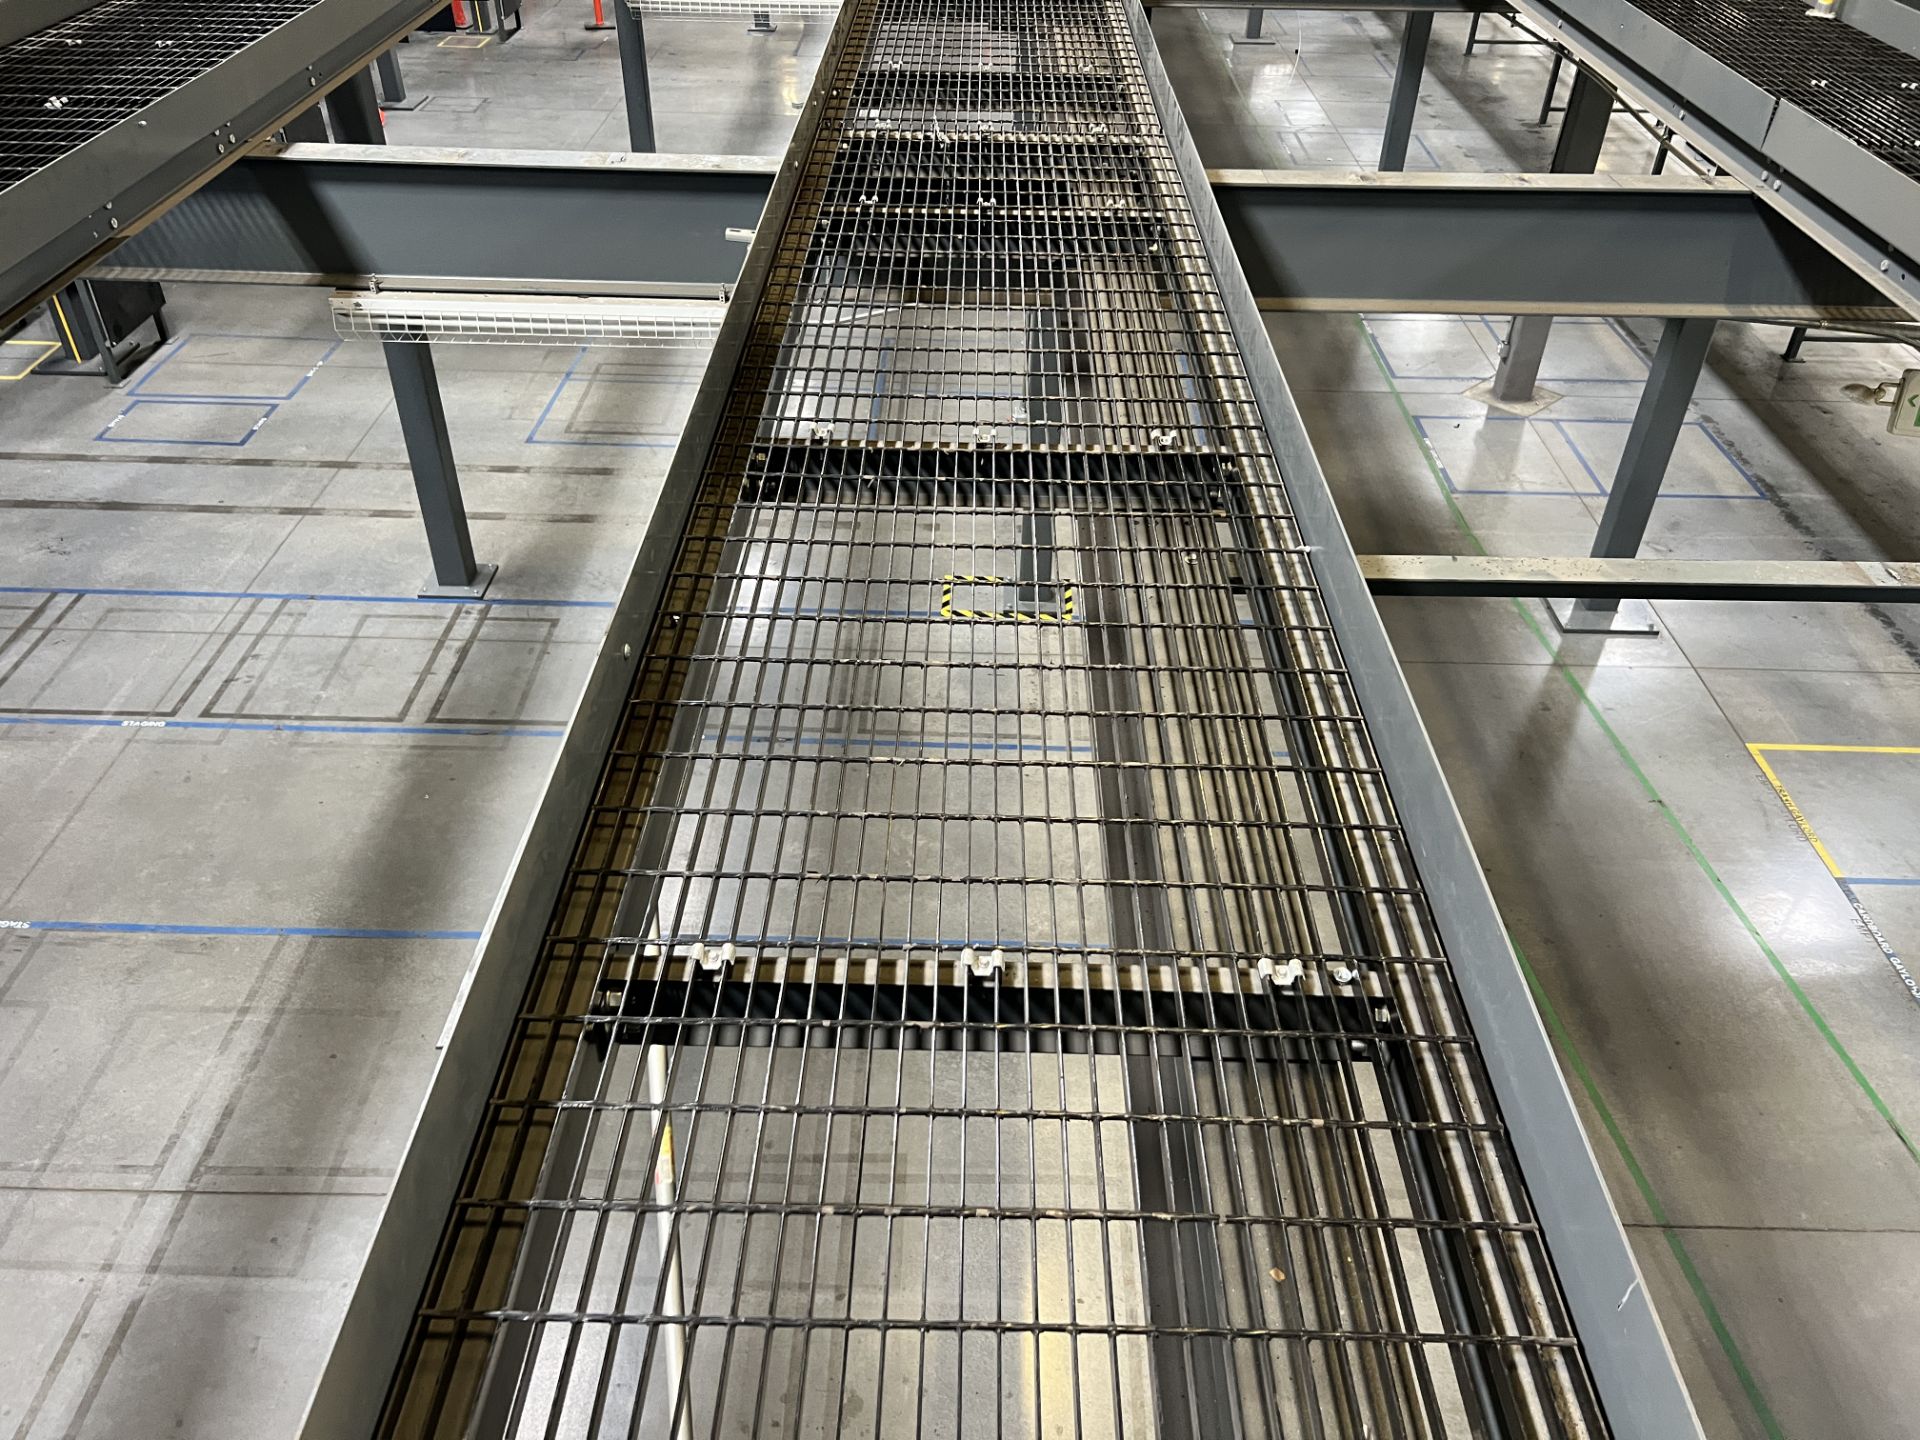 Steele Solutions Catwalk - Image 2 of 7